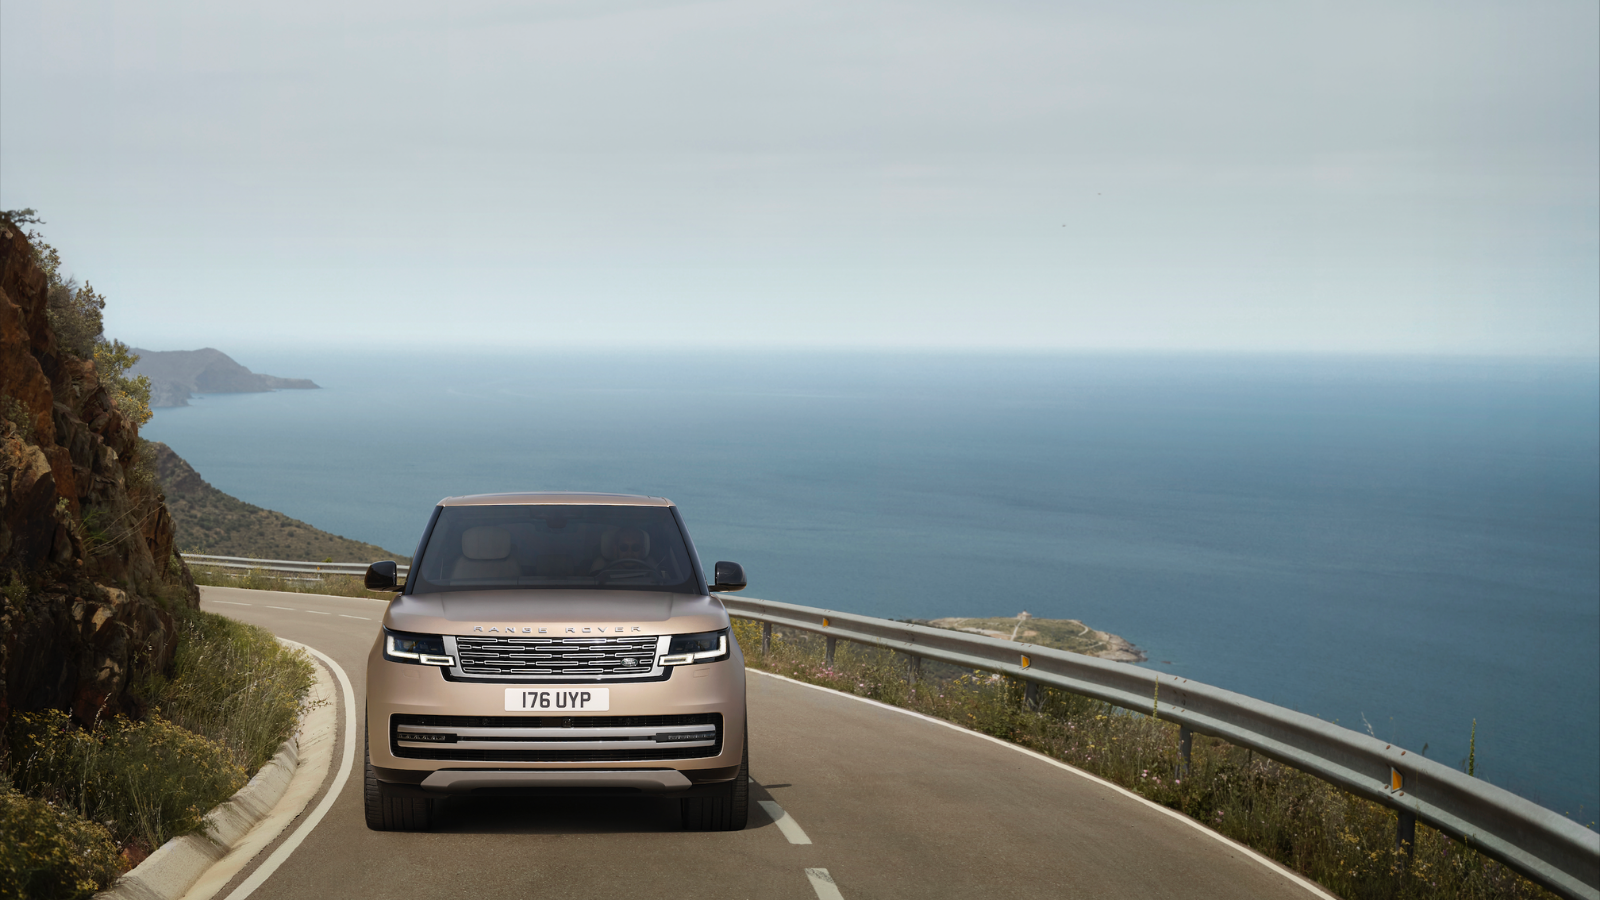 INTRODUCING THE NEW RANGE ROVER: BREATHTAKING MODERNITY, PEERLESS REFINEMENT AND UNMATCHED CAPABILITY’